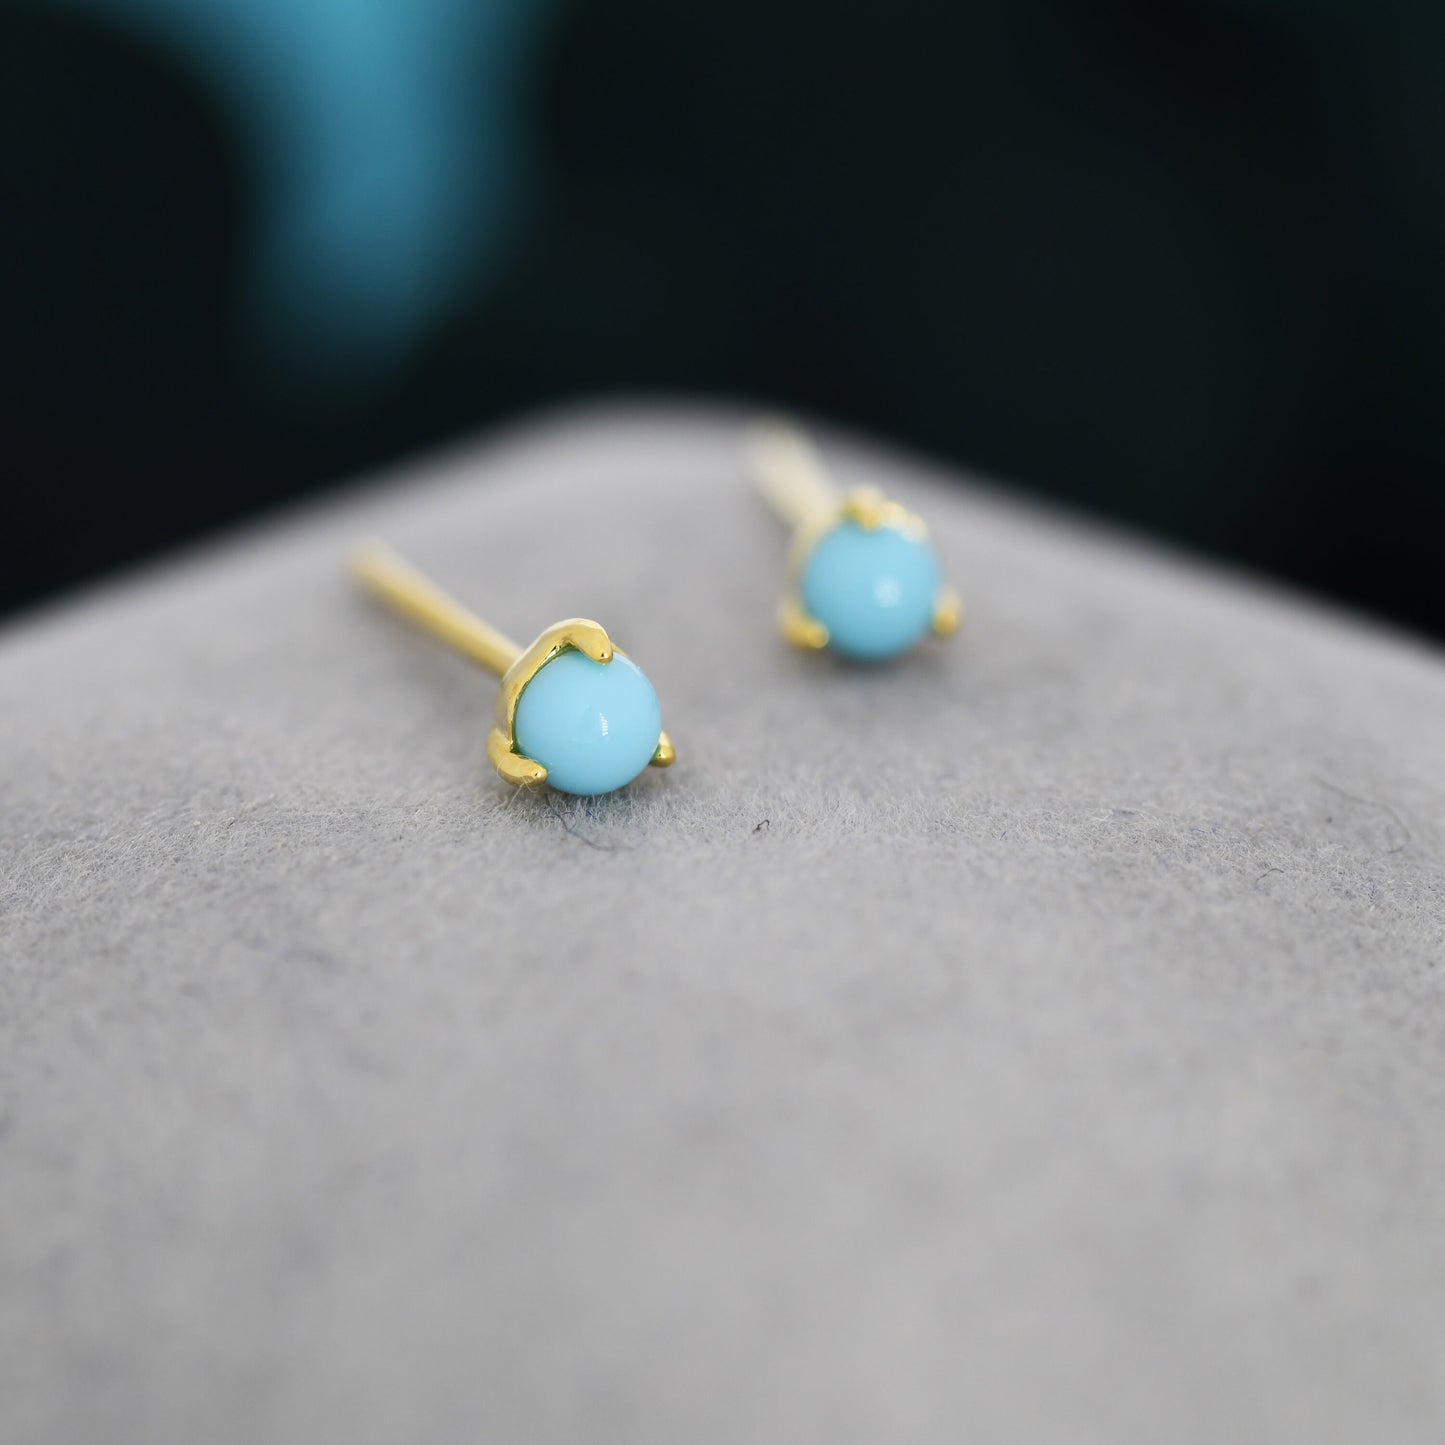 Very Tiny Genuine Turquoise Stone Stud Earrings in Sterling Silver, 3mm Turquoise Stud, Silver or Gold, Blue Turquoise Earrings, December